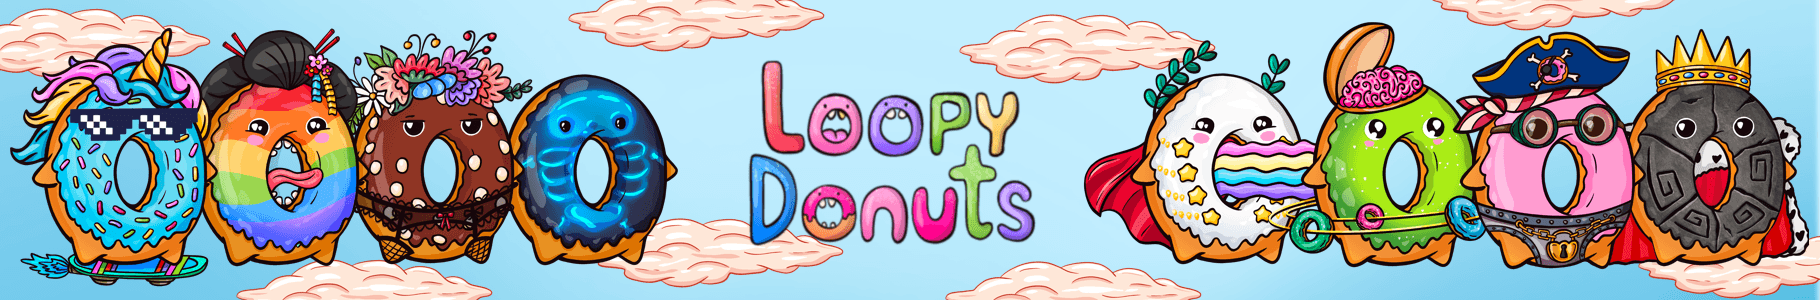 old-loopy-donuts-deployer バナー